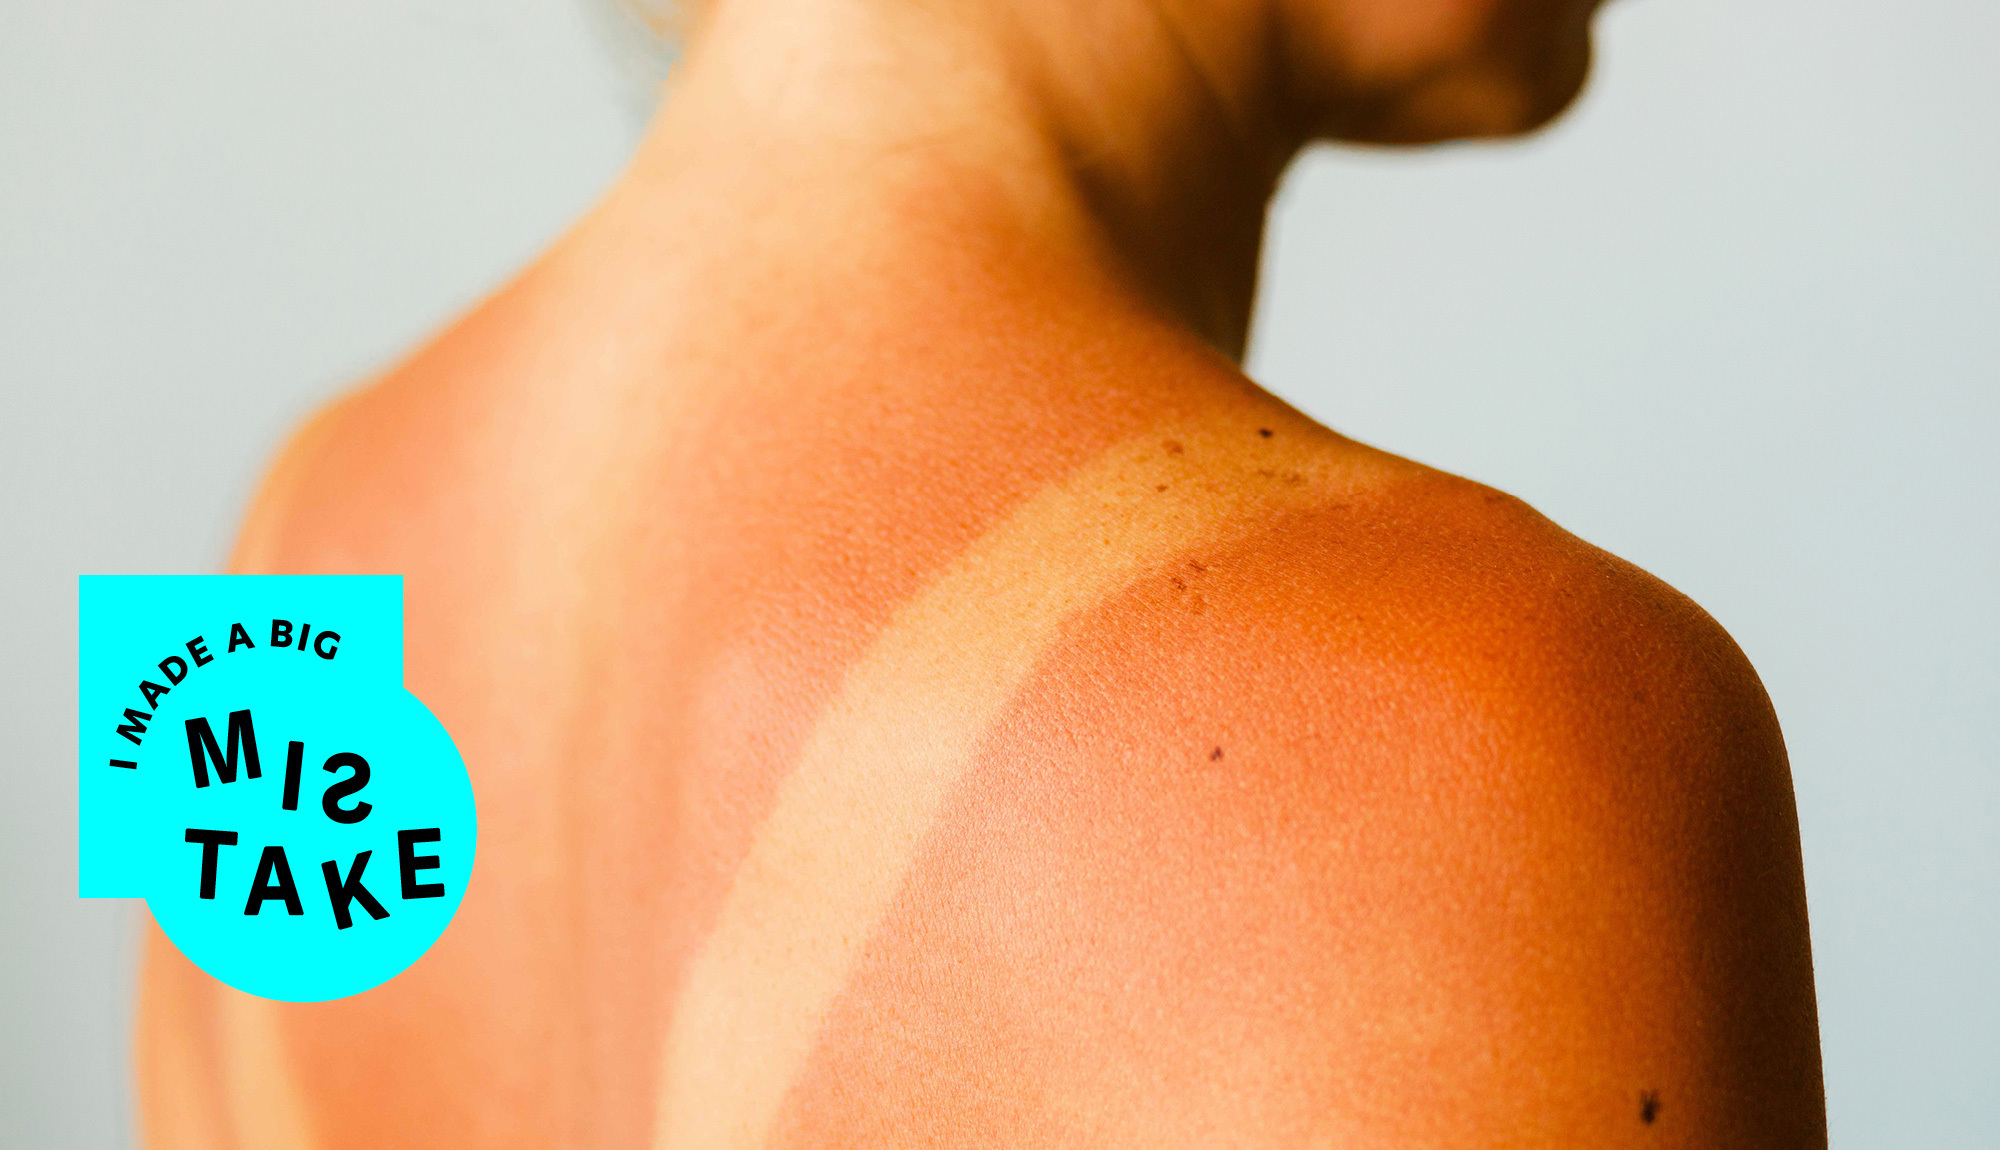 a person showing a sunburn on their shoulder and back, probably looking for a sunburn treatment.